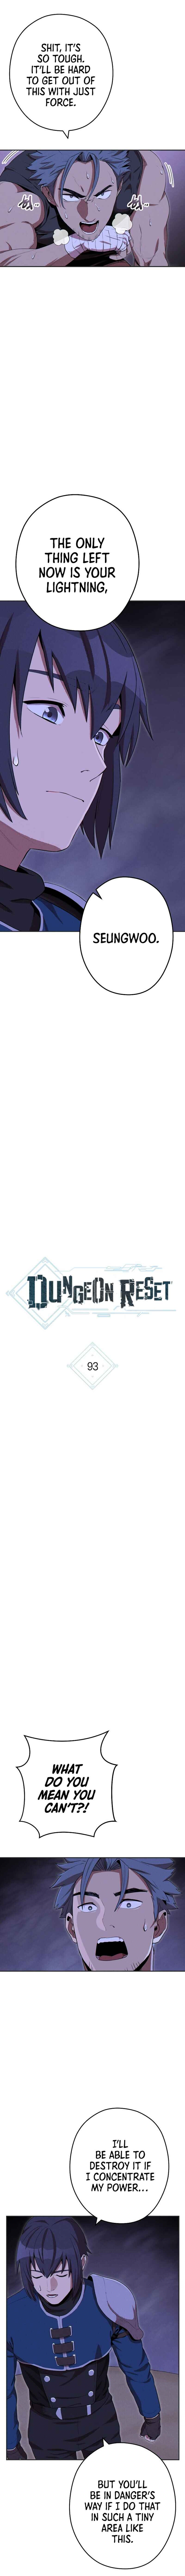 Dungeon Reset chapter 0.093